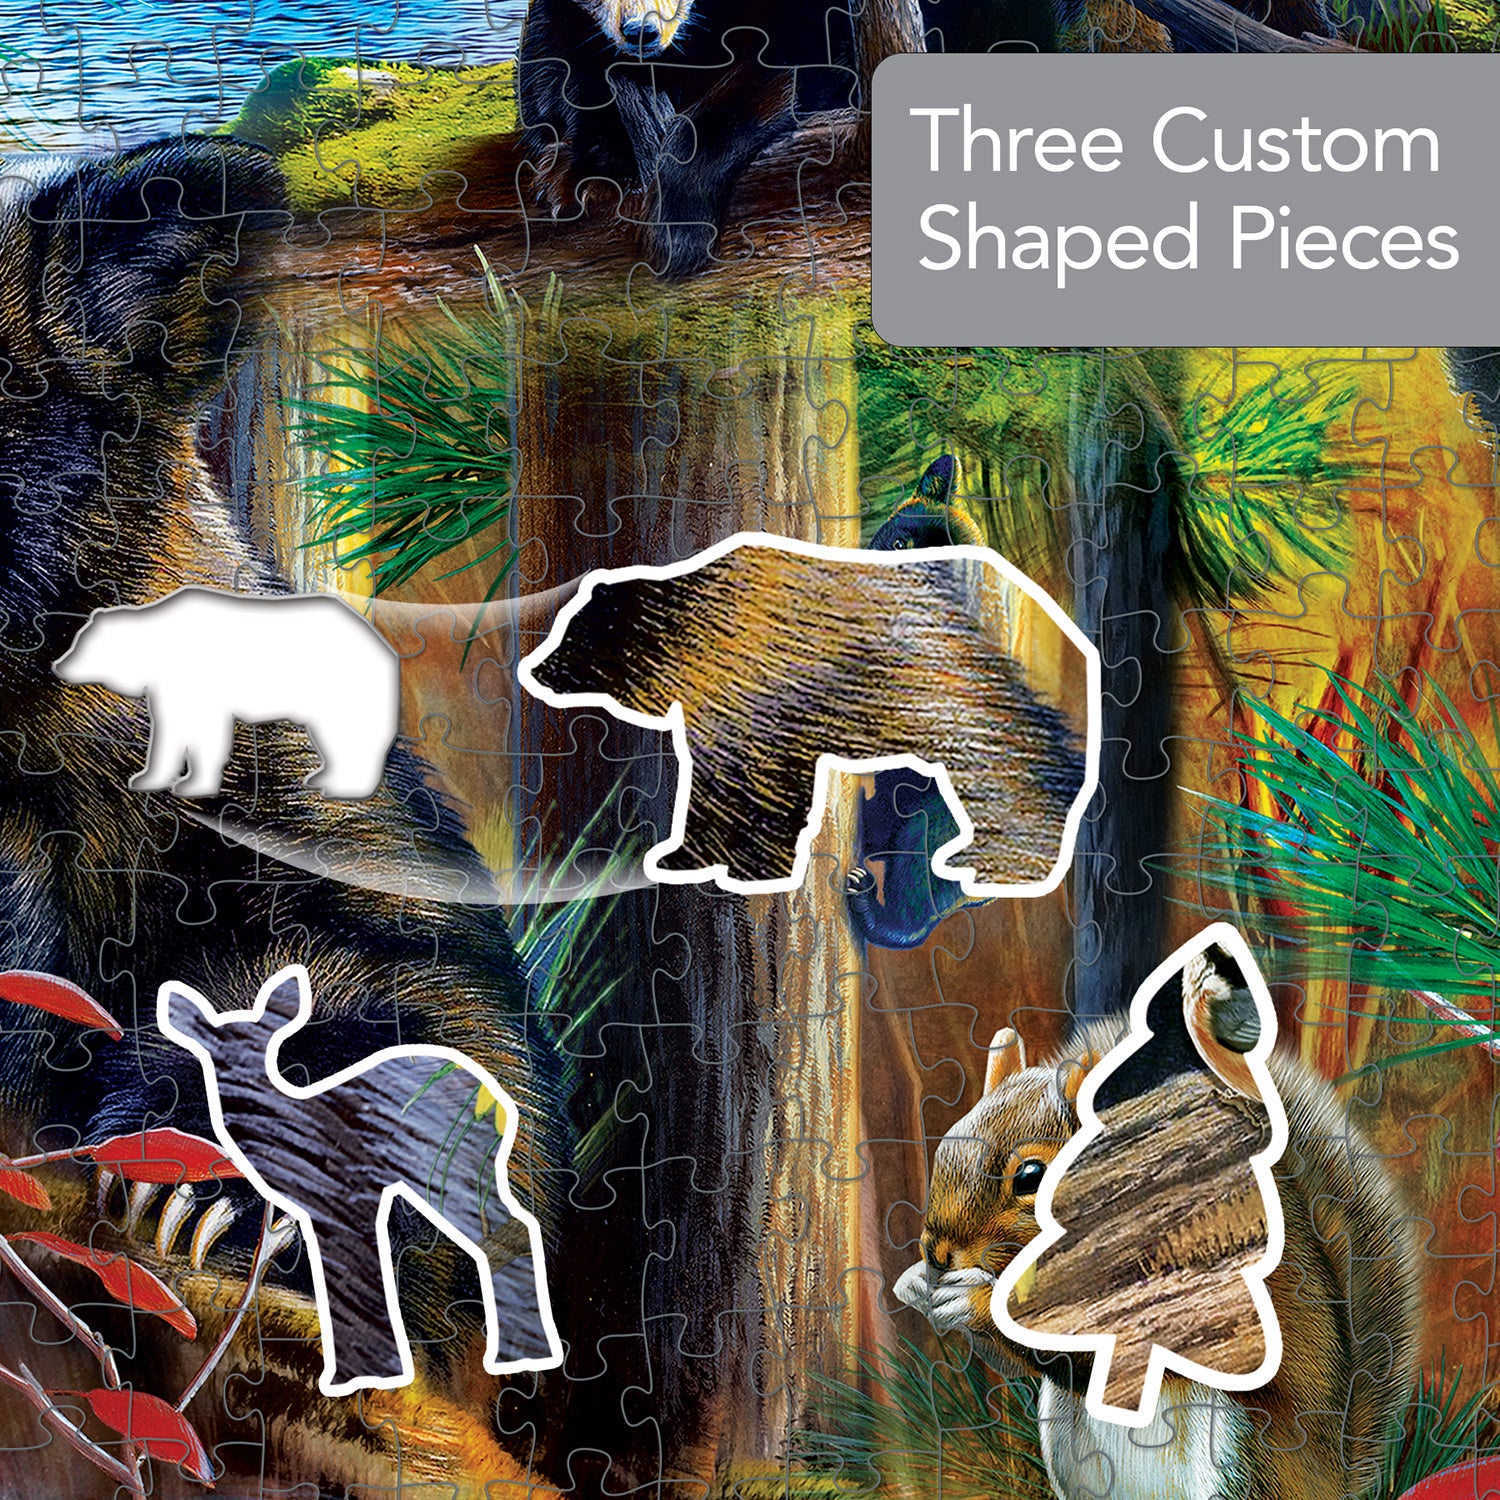 Contours - Wildlife of the Woods 1000 Piece Shaped Jigsaw Puzzle